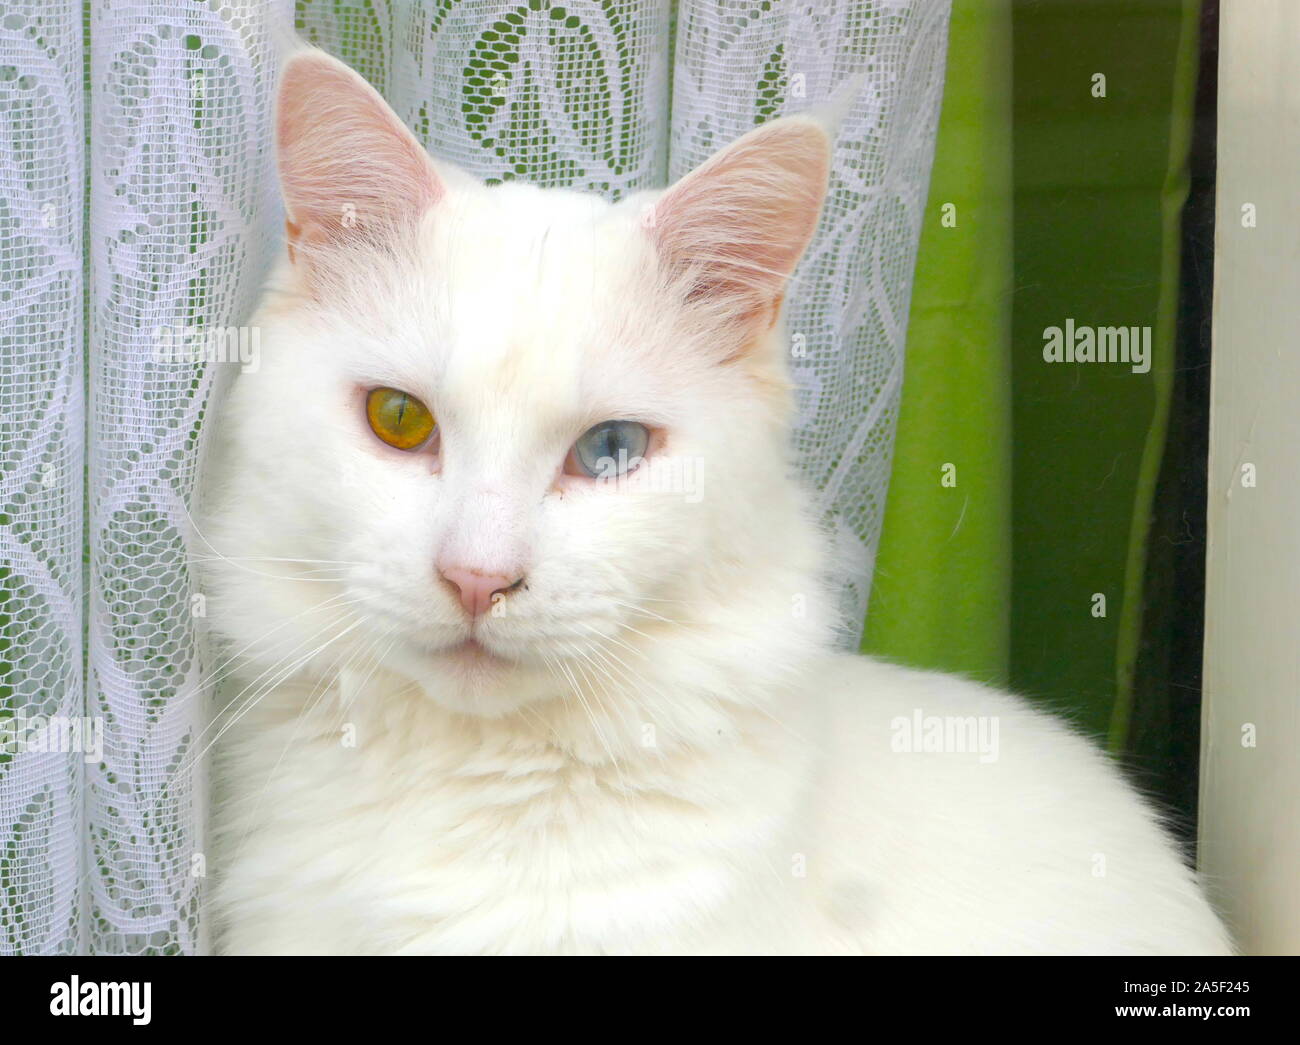 A Cat with Heterochromia a condition where the animal has two different coloured eyes. Stock Photo